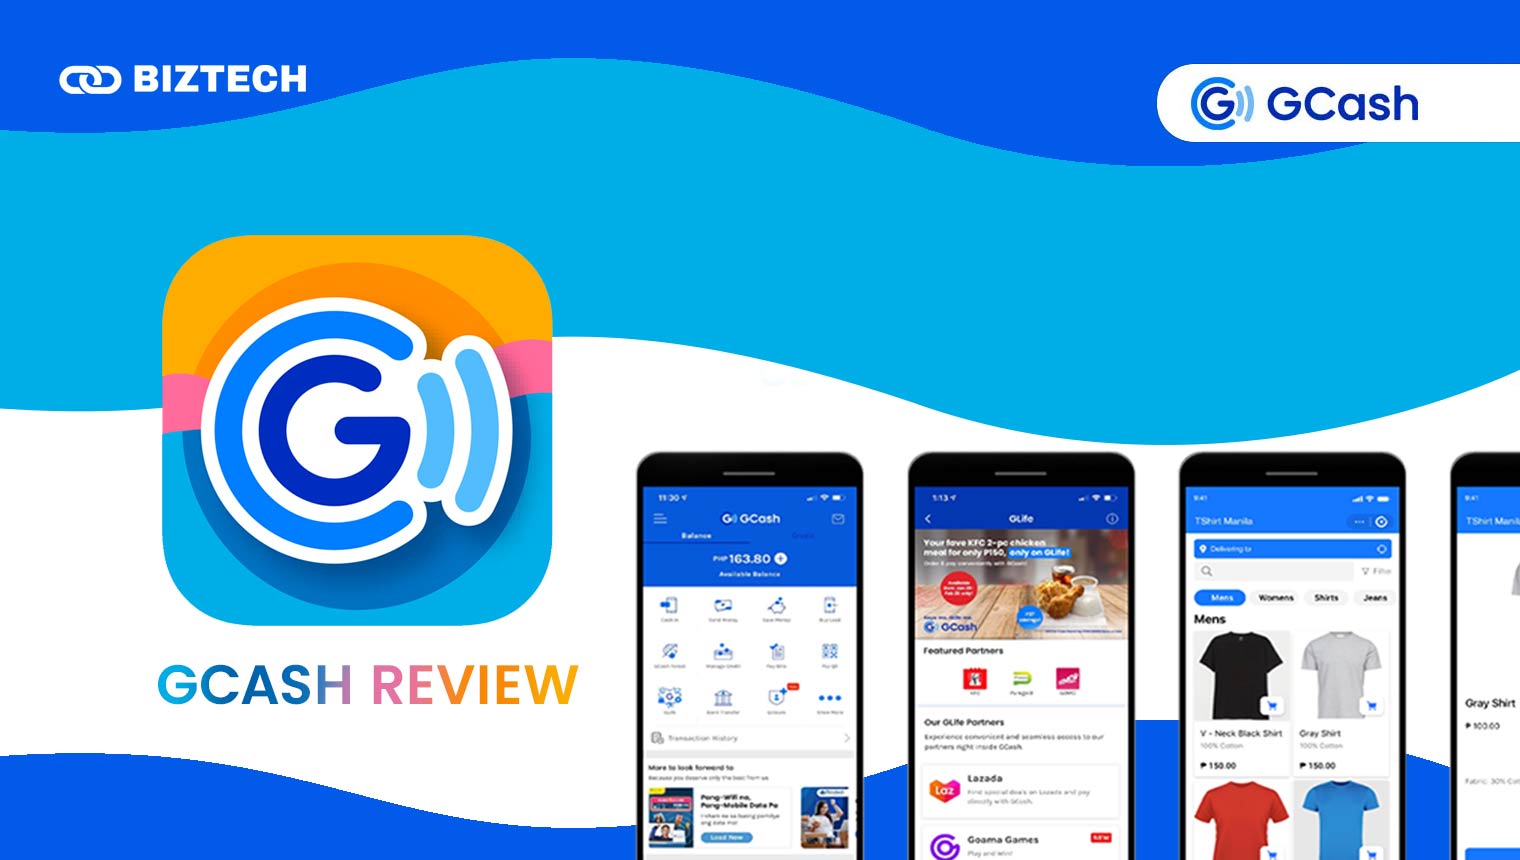 GCash Review: Maximize Your GCash Experience in the Philippines